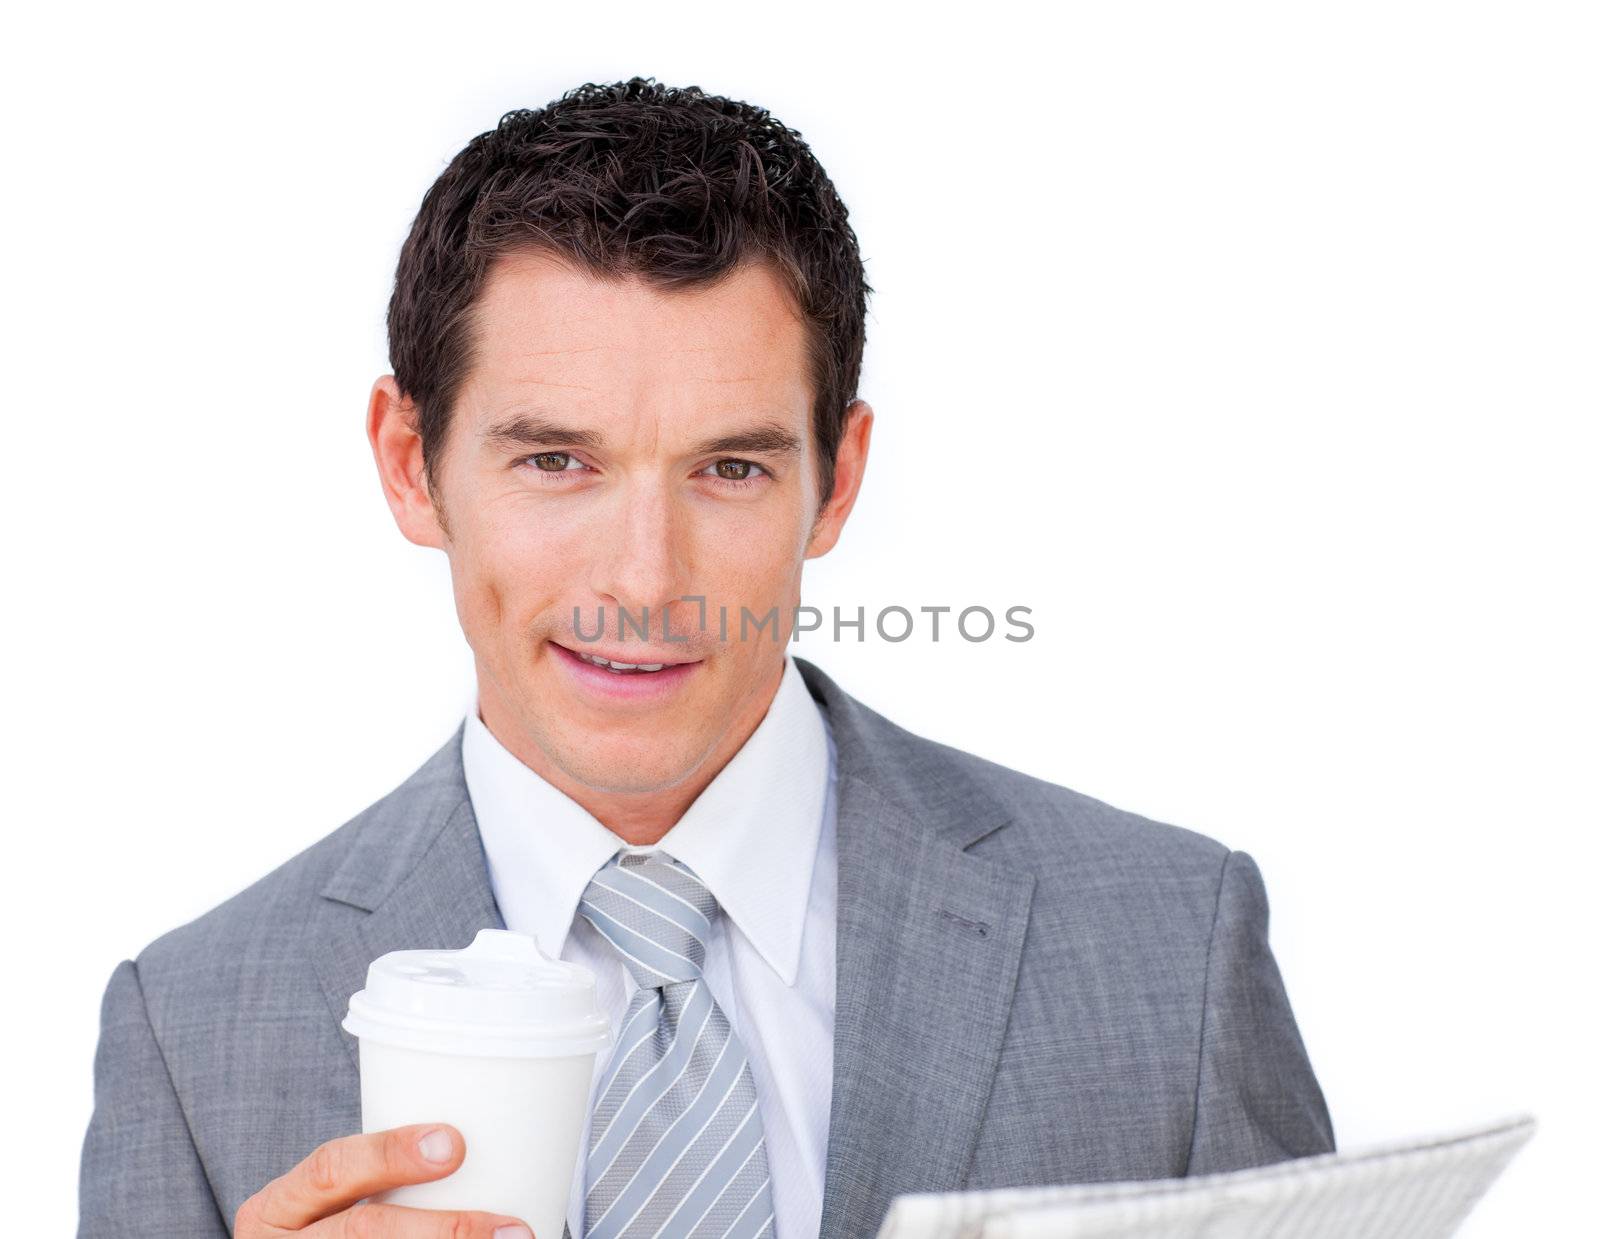 Male executive holding a drinking cup and reading a newspaper looking at the camera